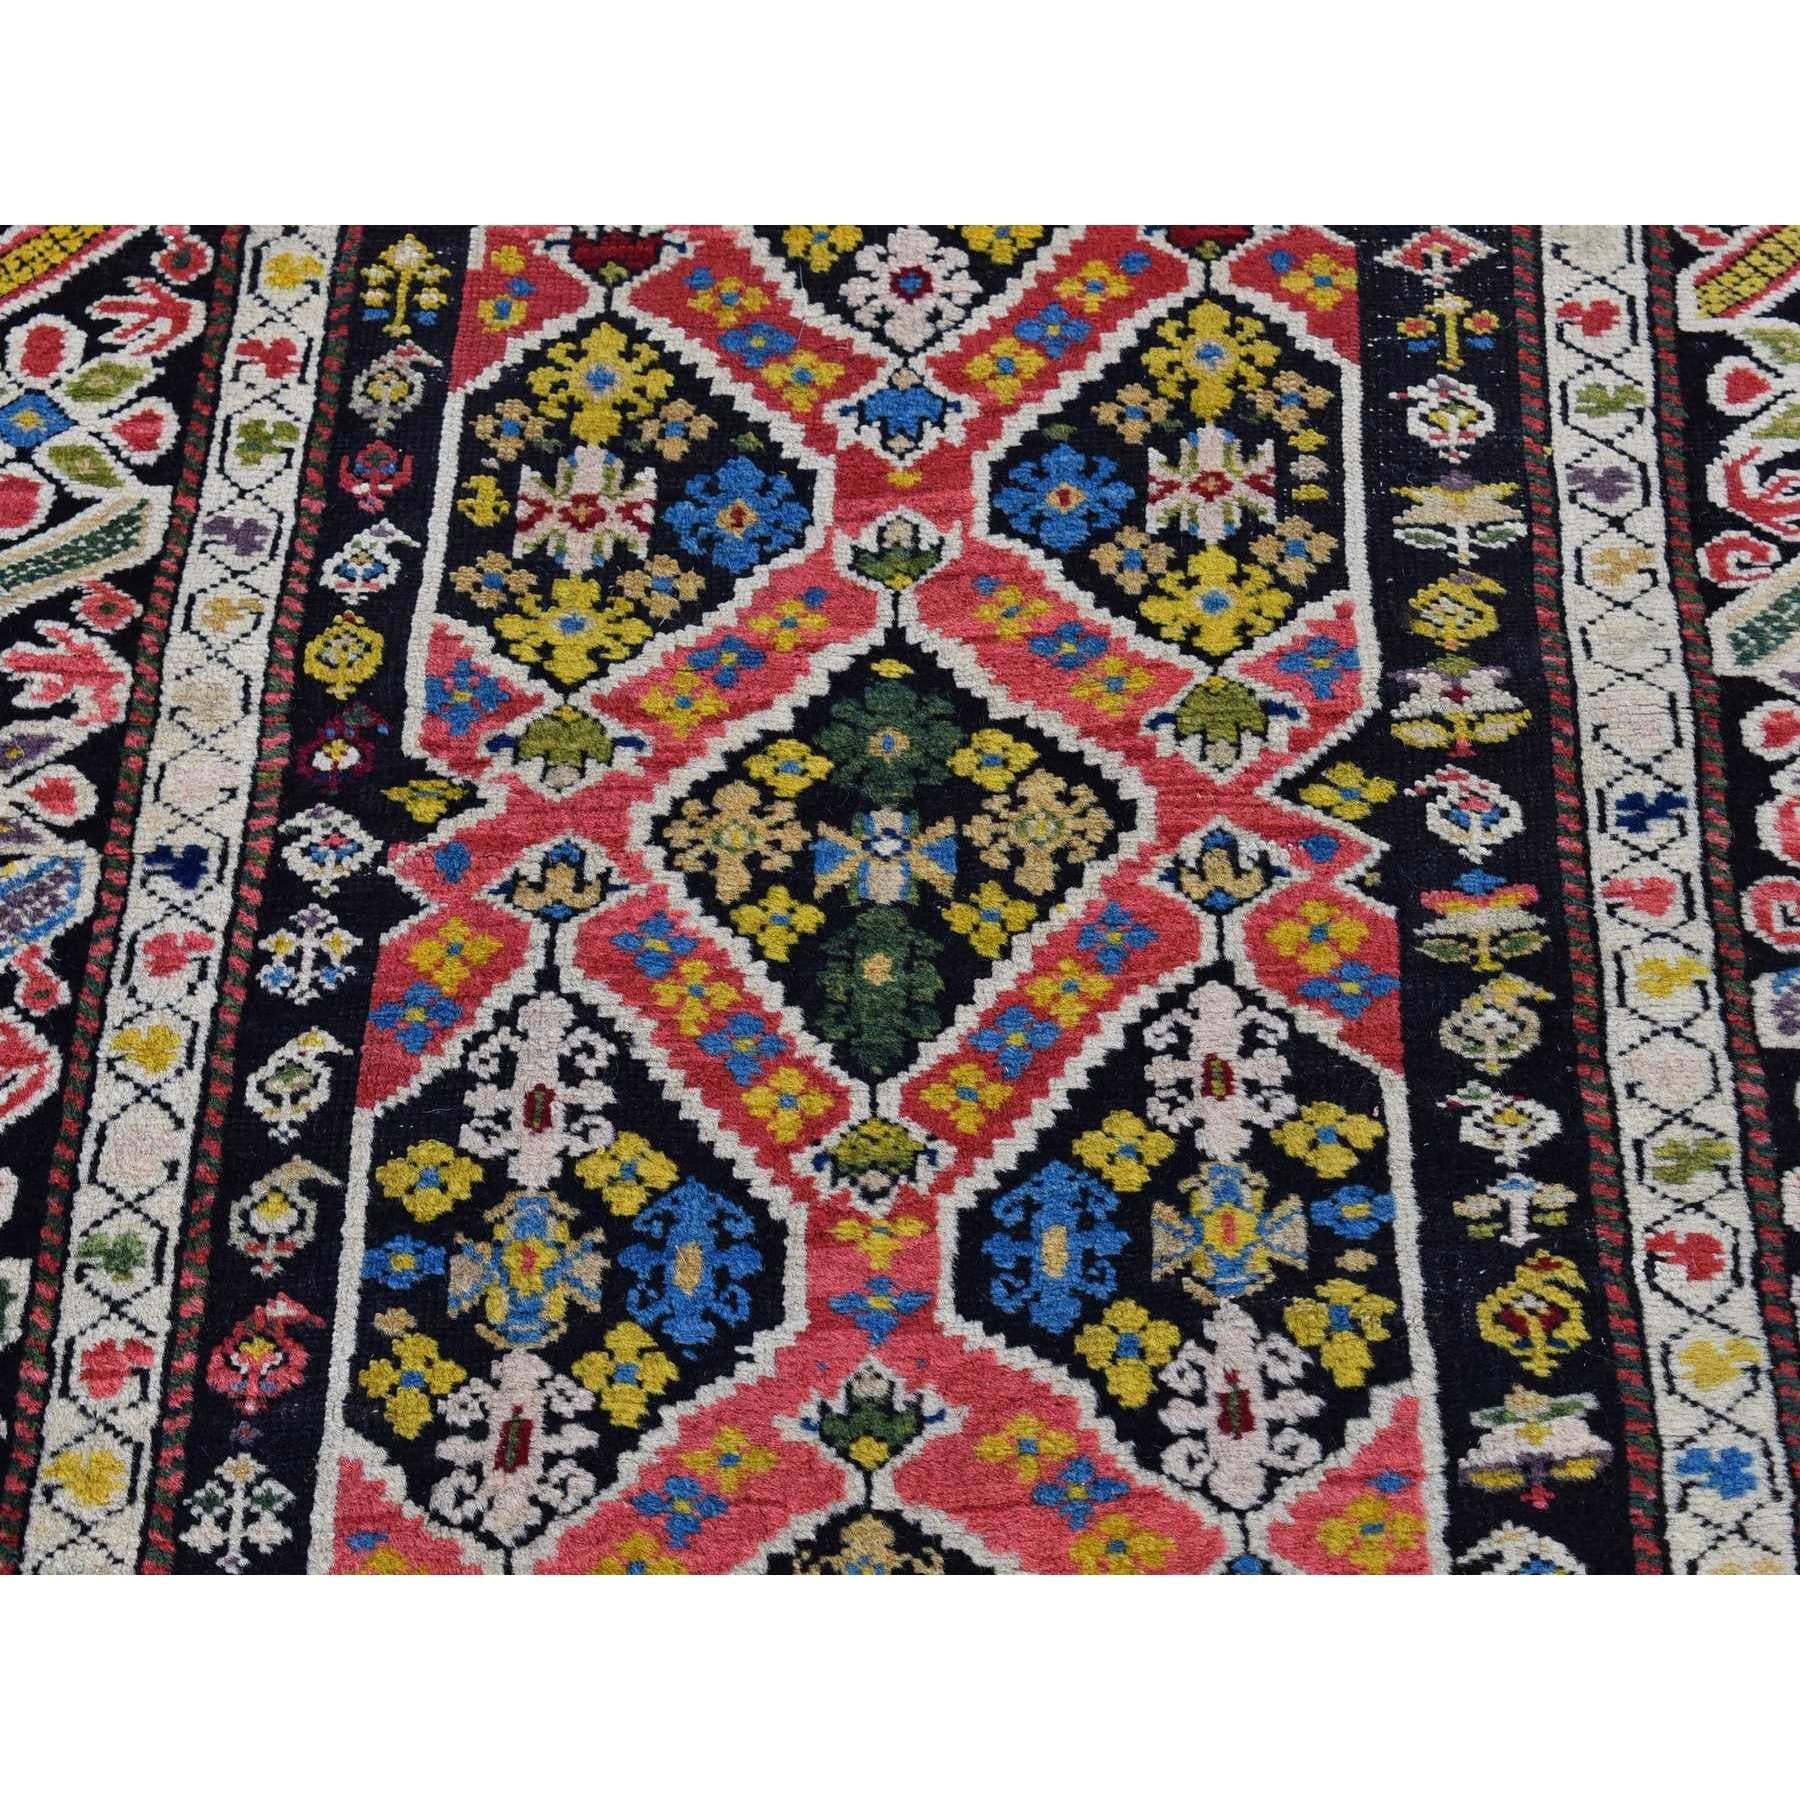 Medieval Antique Caucasian Wide Runner High KPSI, Good Cond, Hand Knotted Brown Wool Rug For Sale